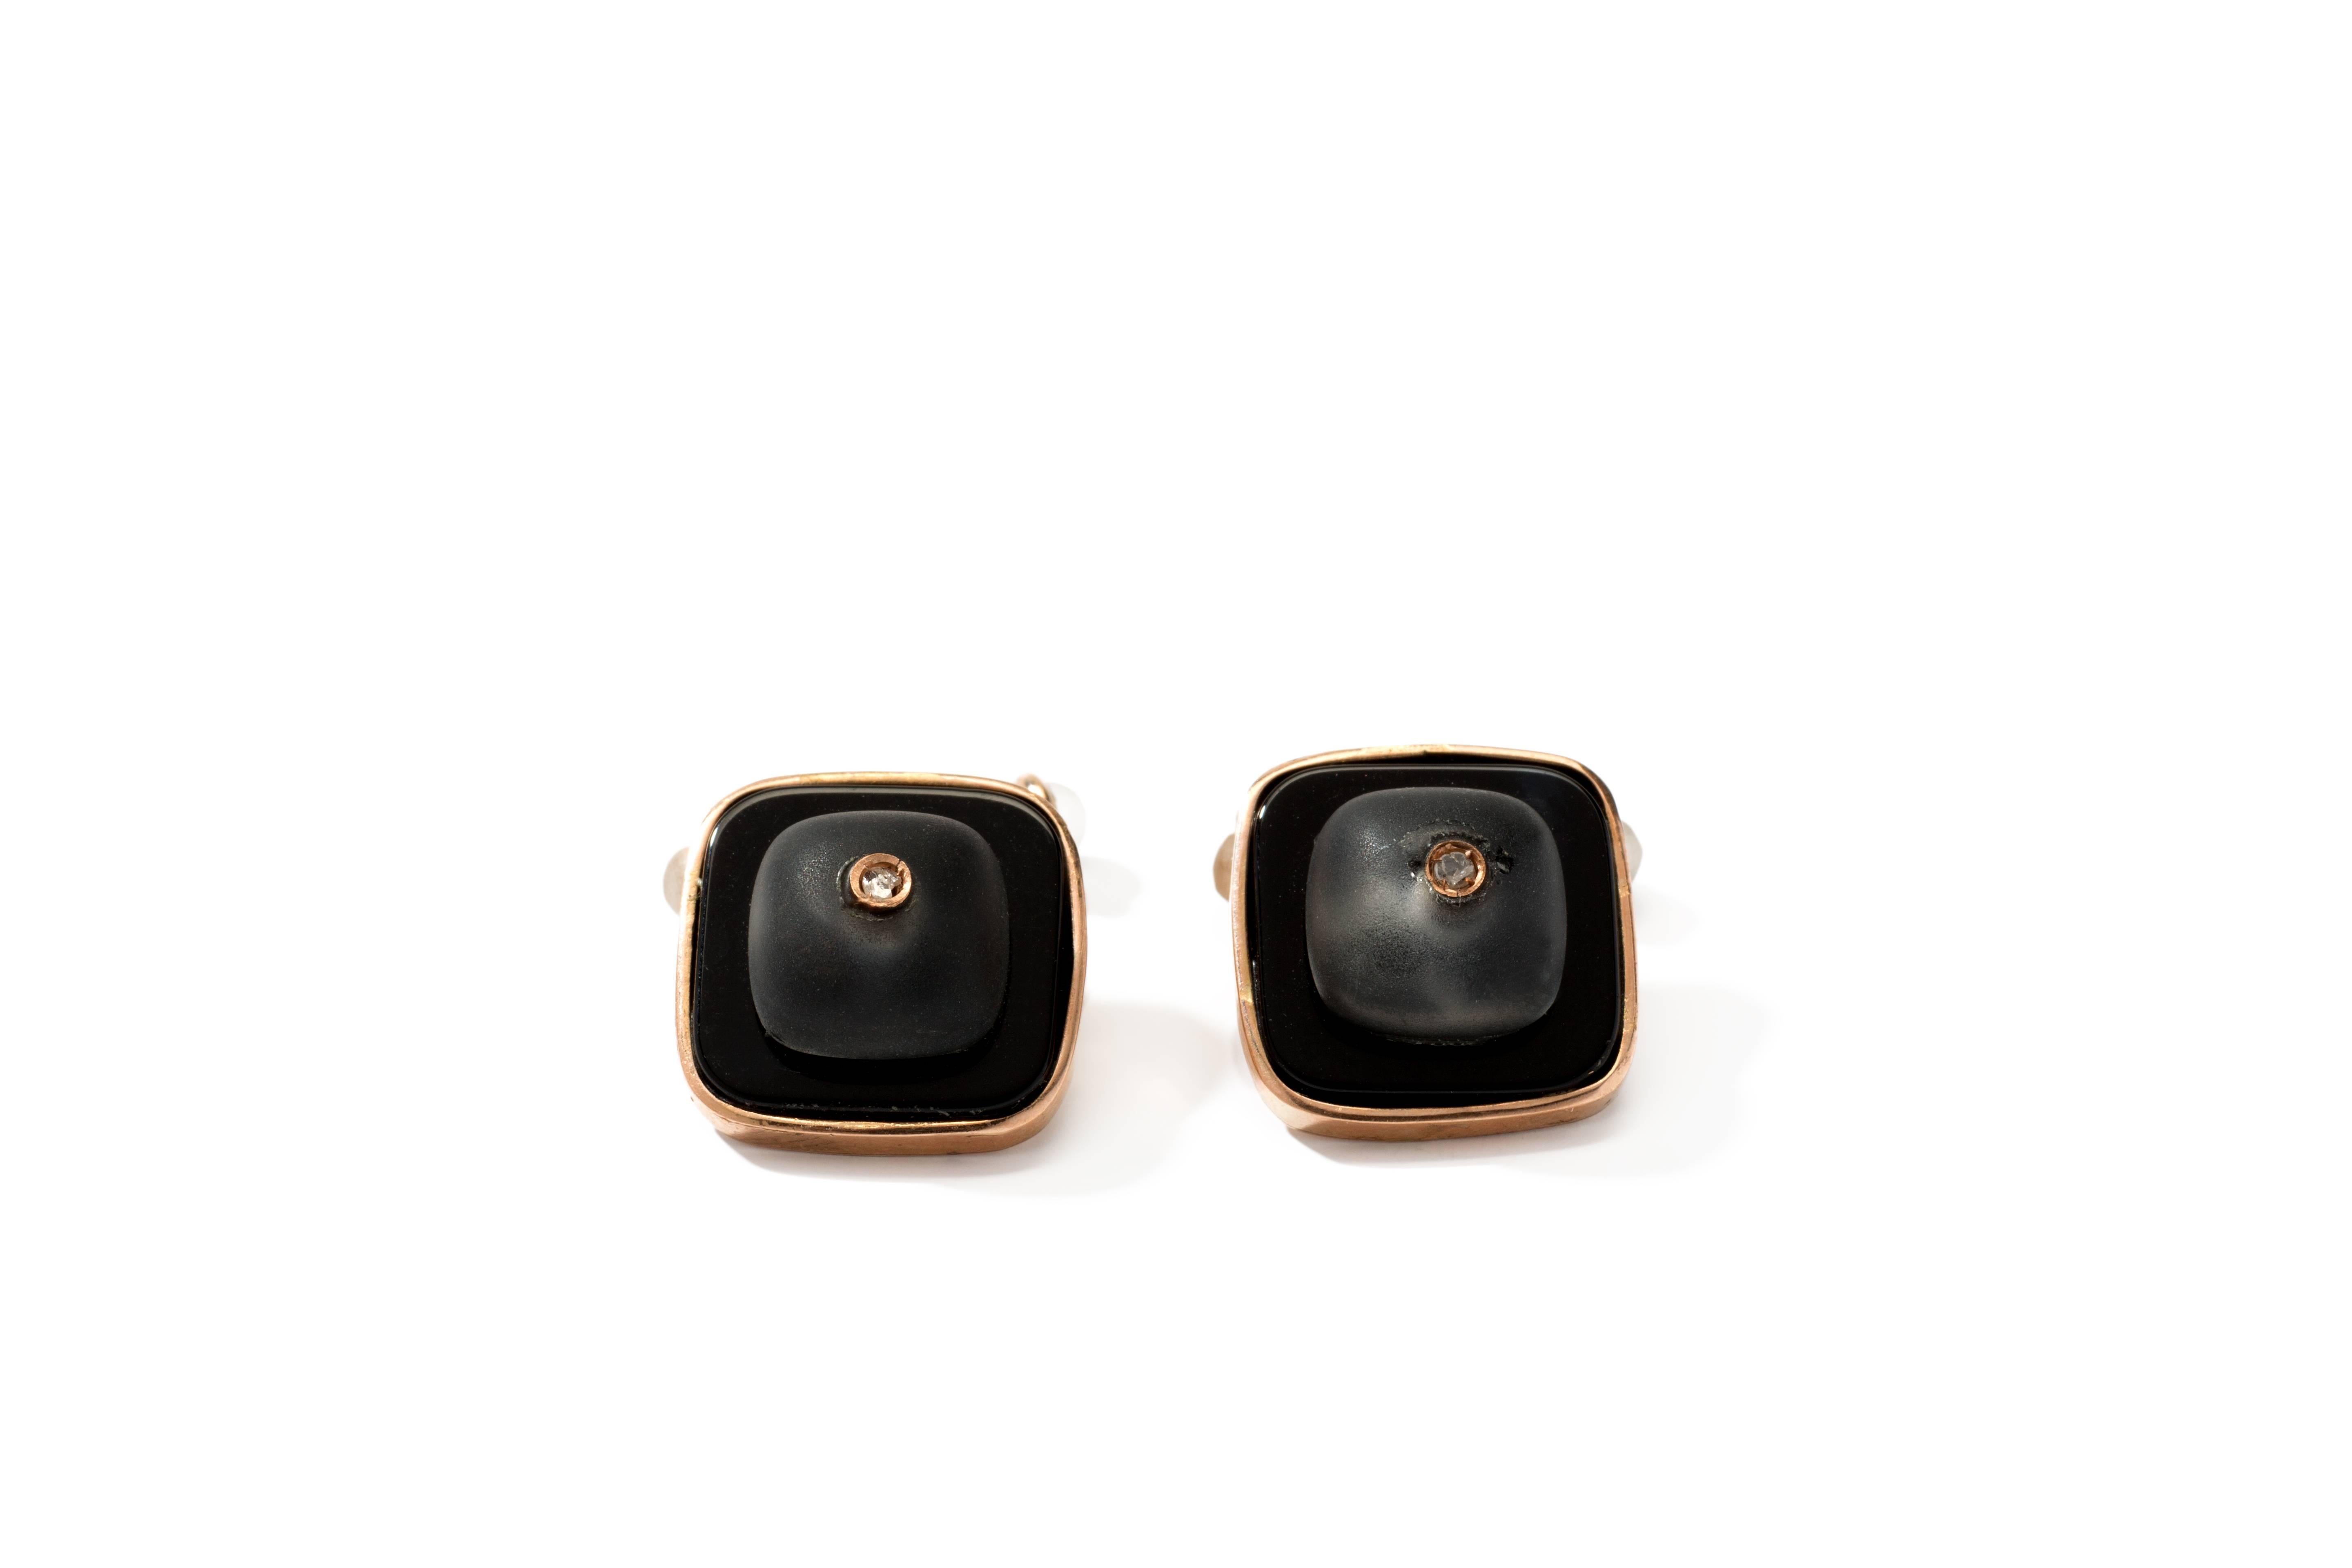 Italy, circa 1970s. 9 ct. red gold cufflinks with rock crystal cabochons and onyx. Central rose-cut diamonds. 
Total weight: 8,8 g. Length: 1.1 in ( 2,8 cm ) Button measurements: 0.63 x 0.63 in ( 1,6 x 1,6 cm )